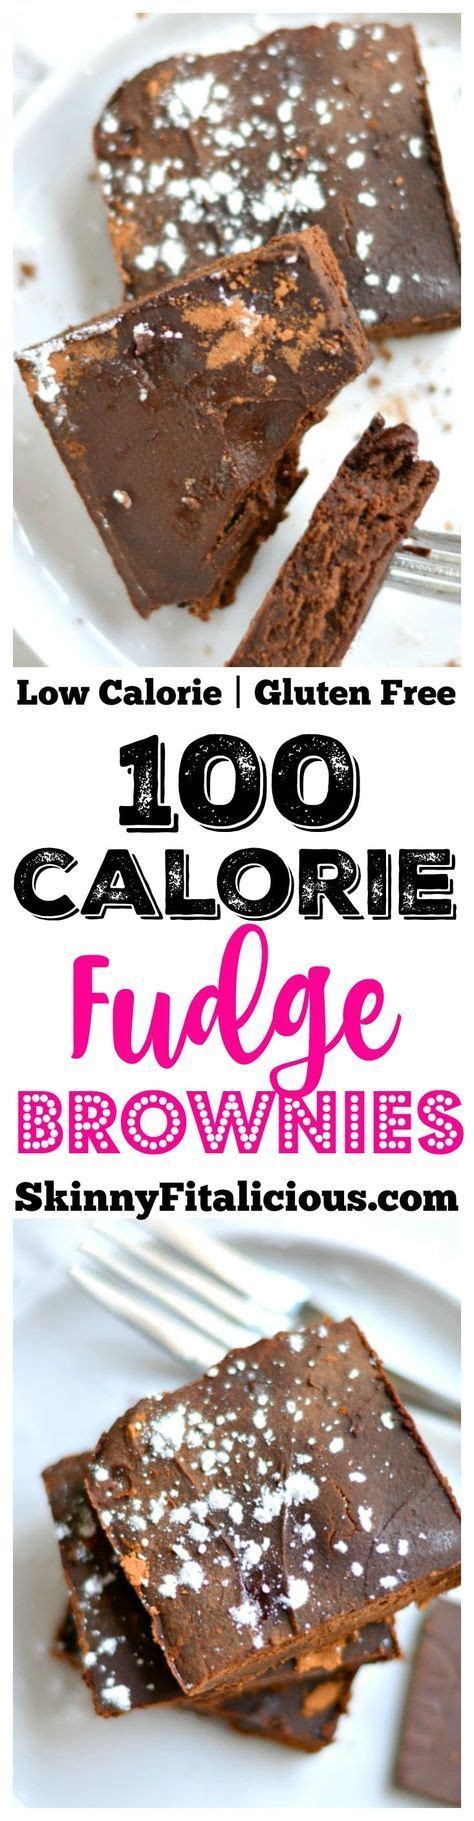 Check out these fabulous desserts that will satisfy that chocolate craving while also helping you reach your goals for a healthier life! Silky 100 Calorie Fudge Brownies made healthy with rich dark chocolate and no added suga… (With ...